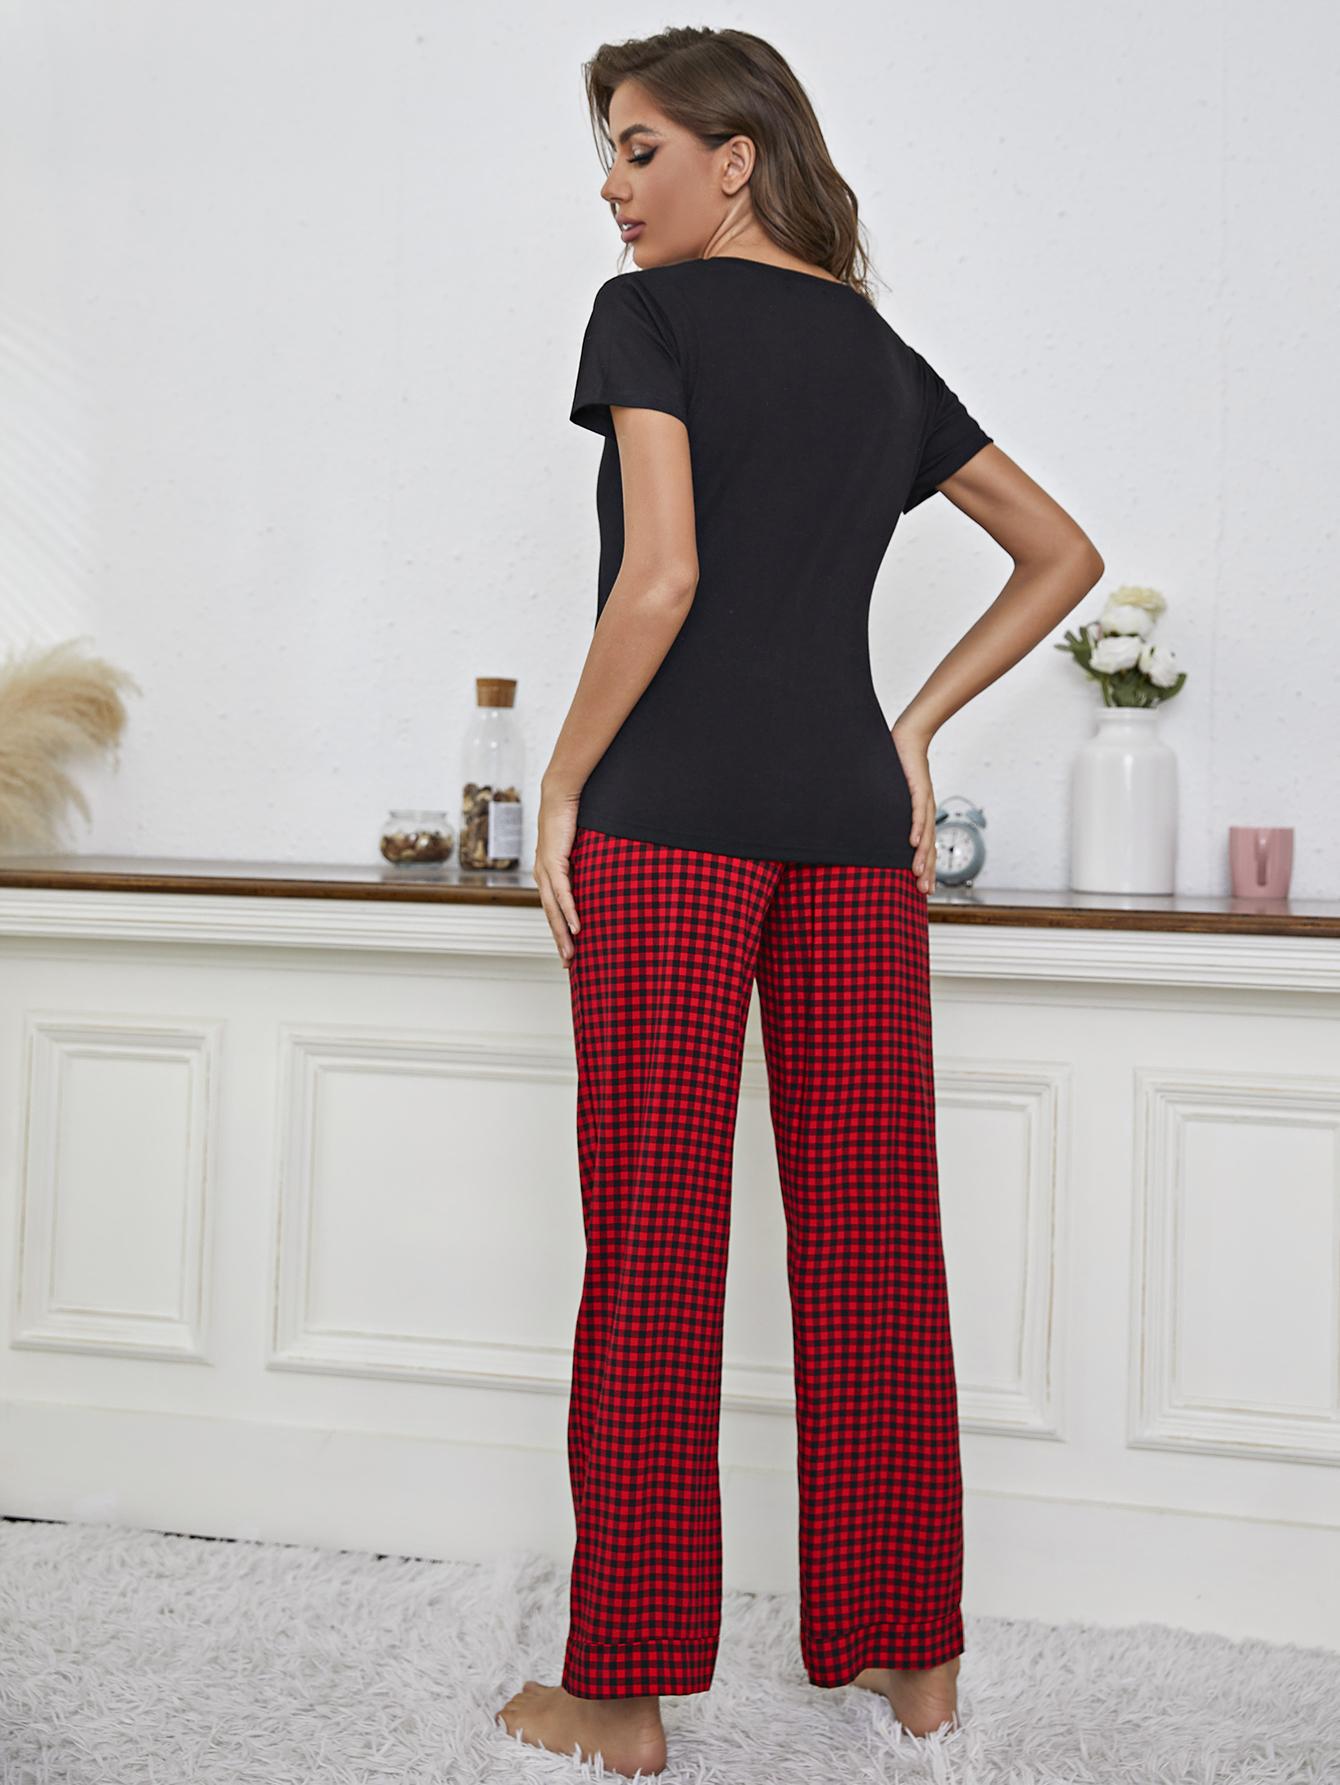 V-Neck Top and Gingham Pants Lounge Set - Tophatter Deals and Online Shopping - Electronics, Jewelry, Beauty, Health, Gadgets, Fashion - Tophatter's Discounts & Offers - tophatters